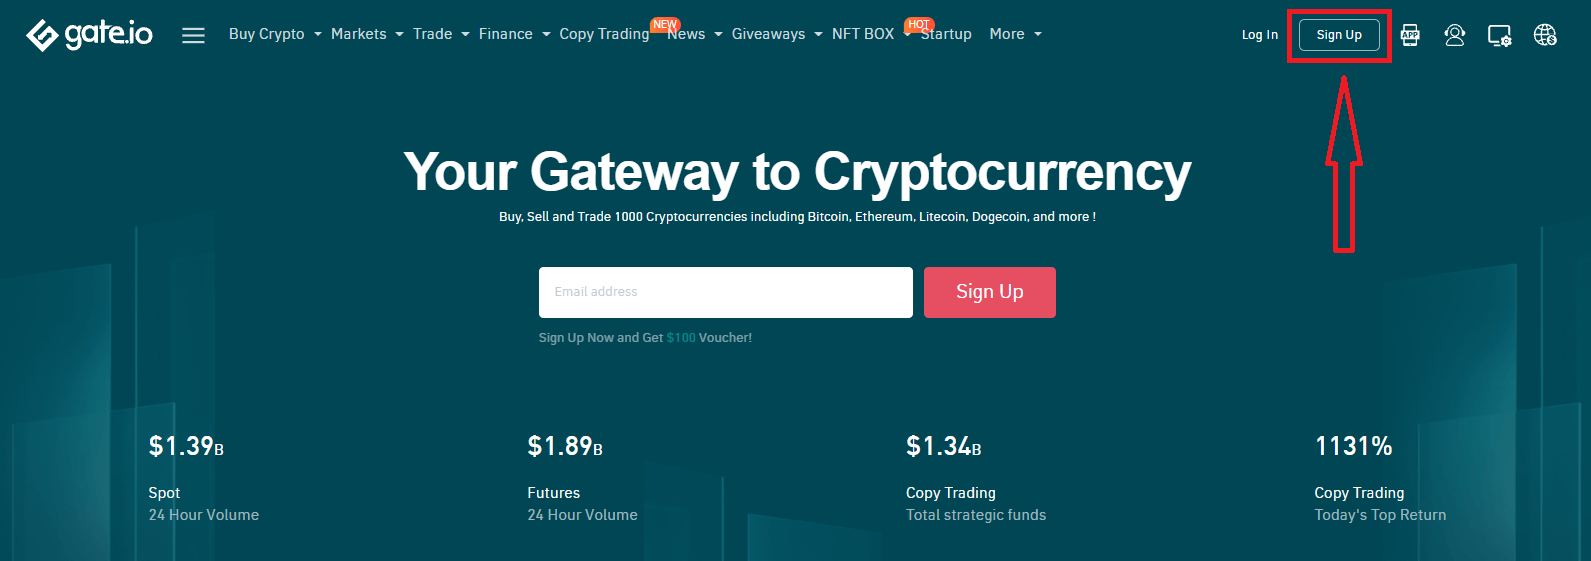 How to Register and Withdraw at Gate.io